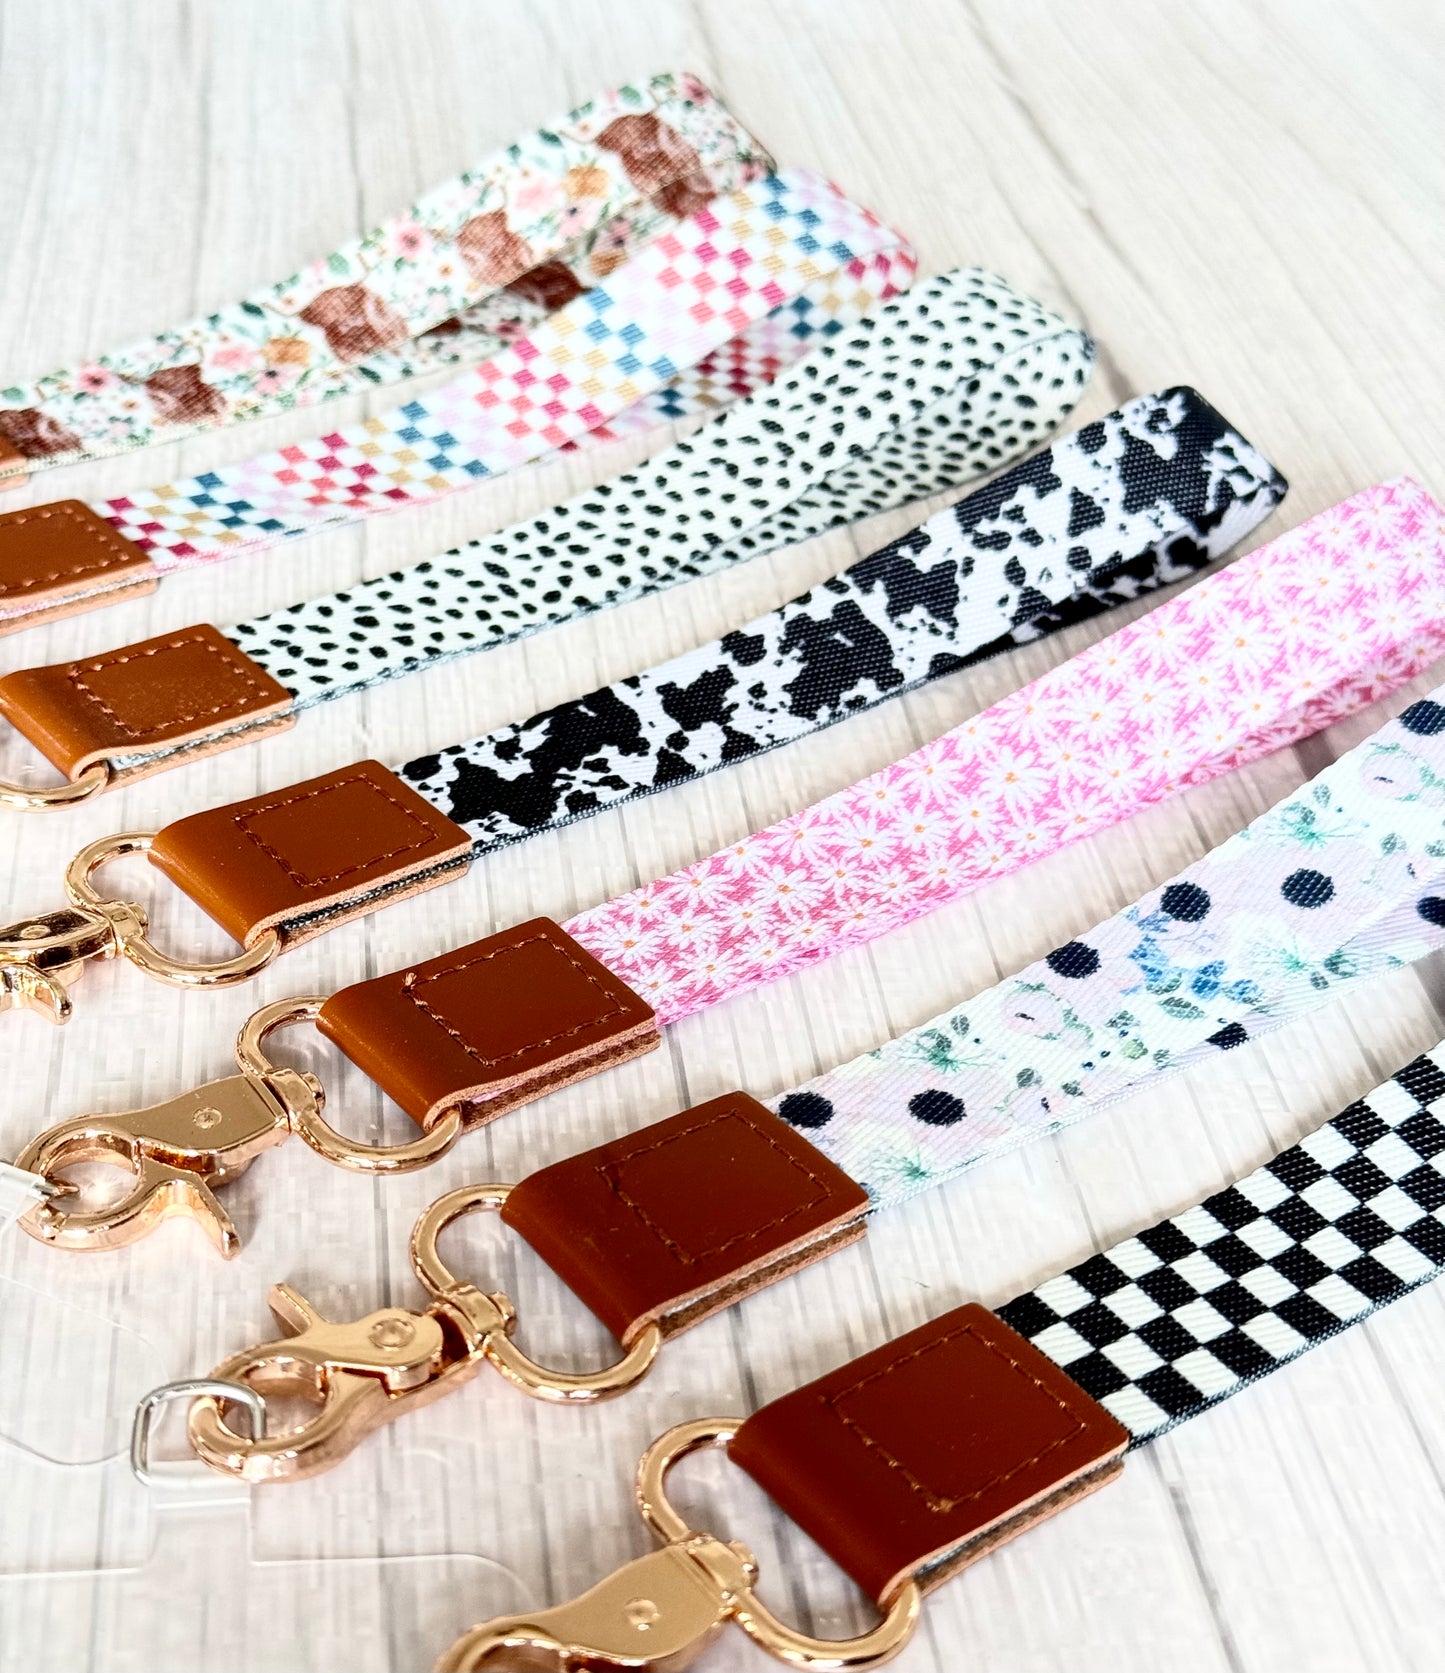 Phone Wrist Strap Keychain with Tether Tab - COLORED CHECKERS